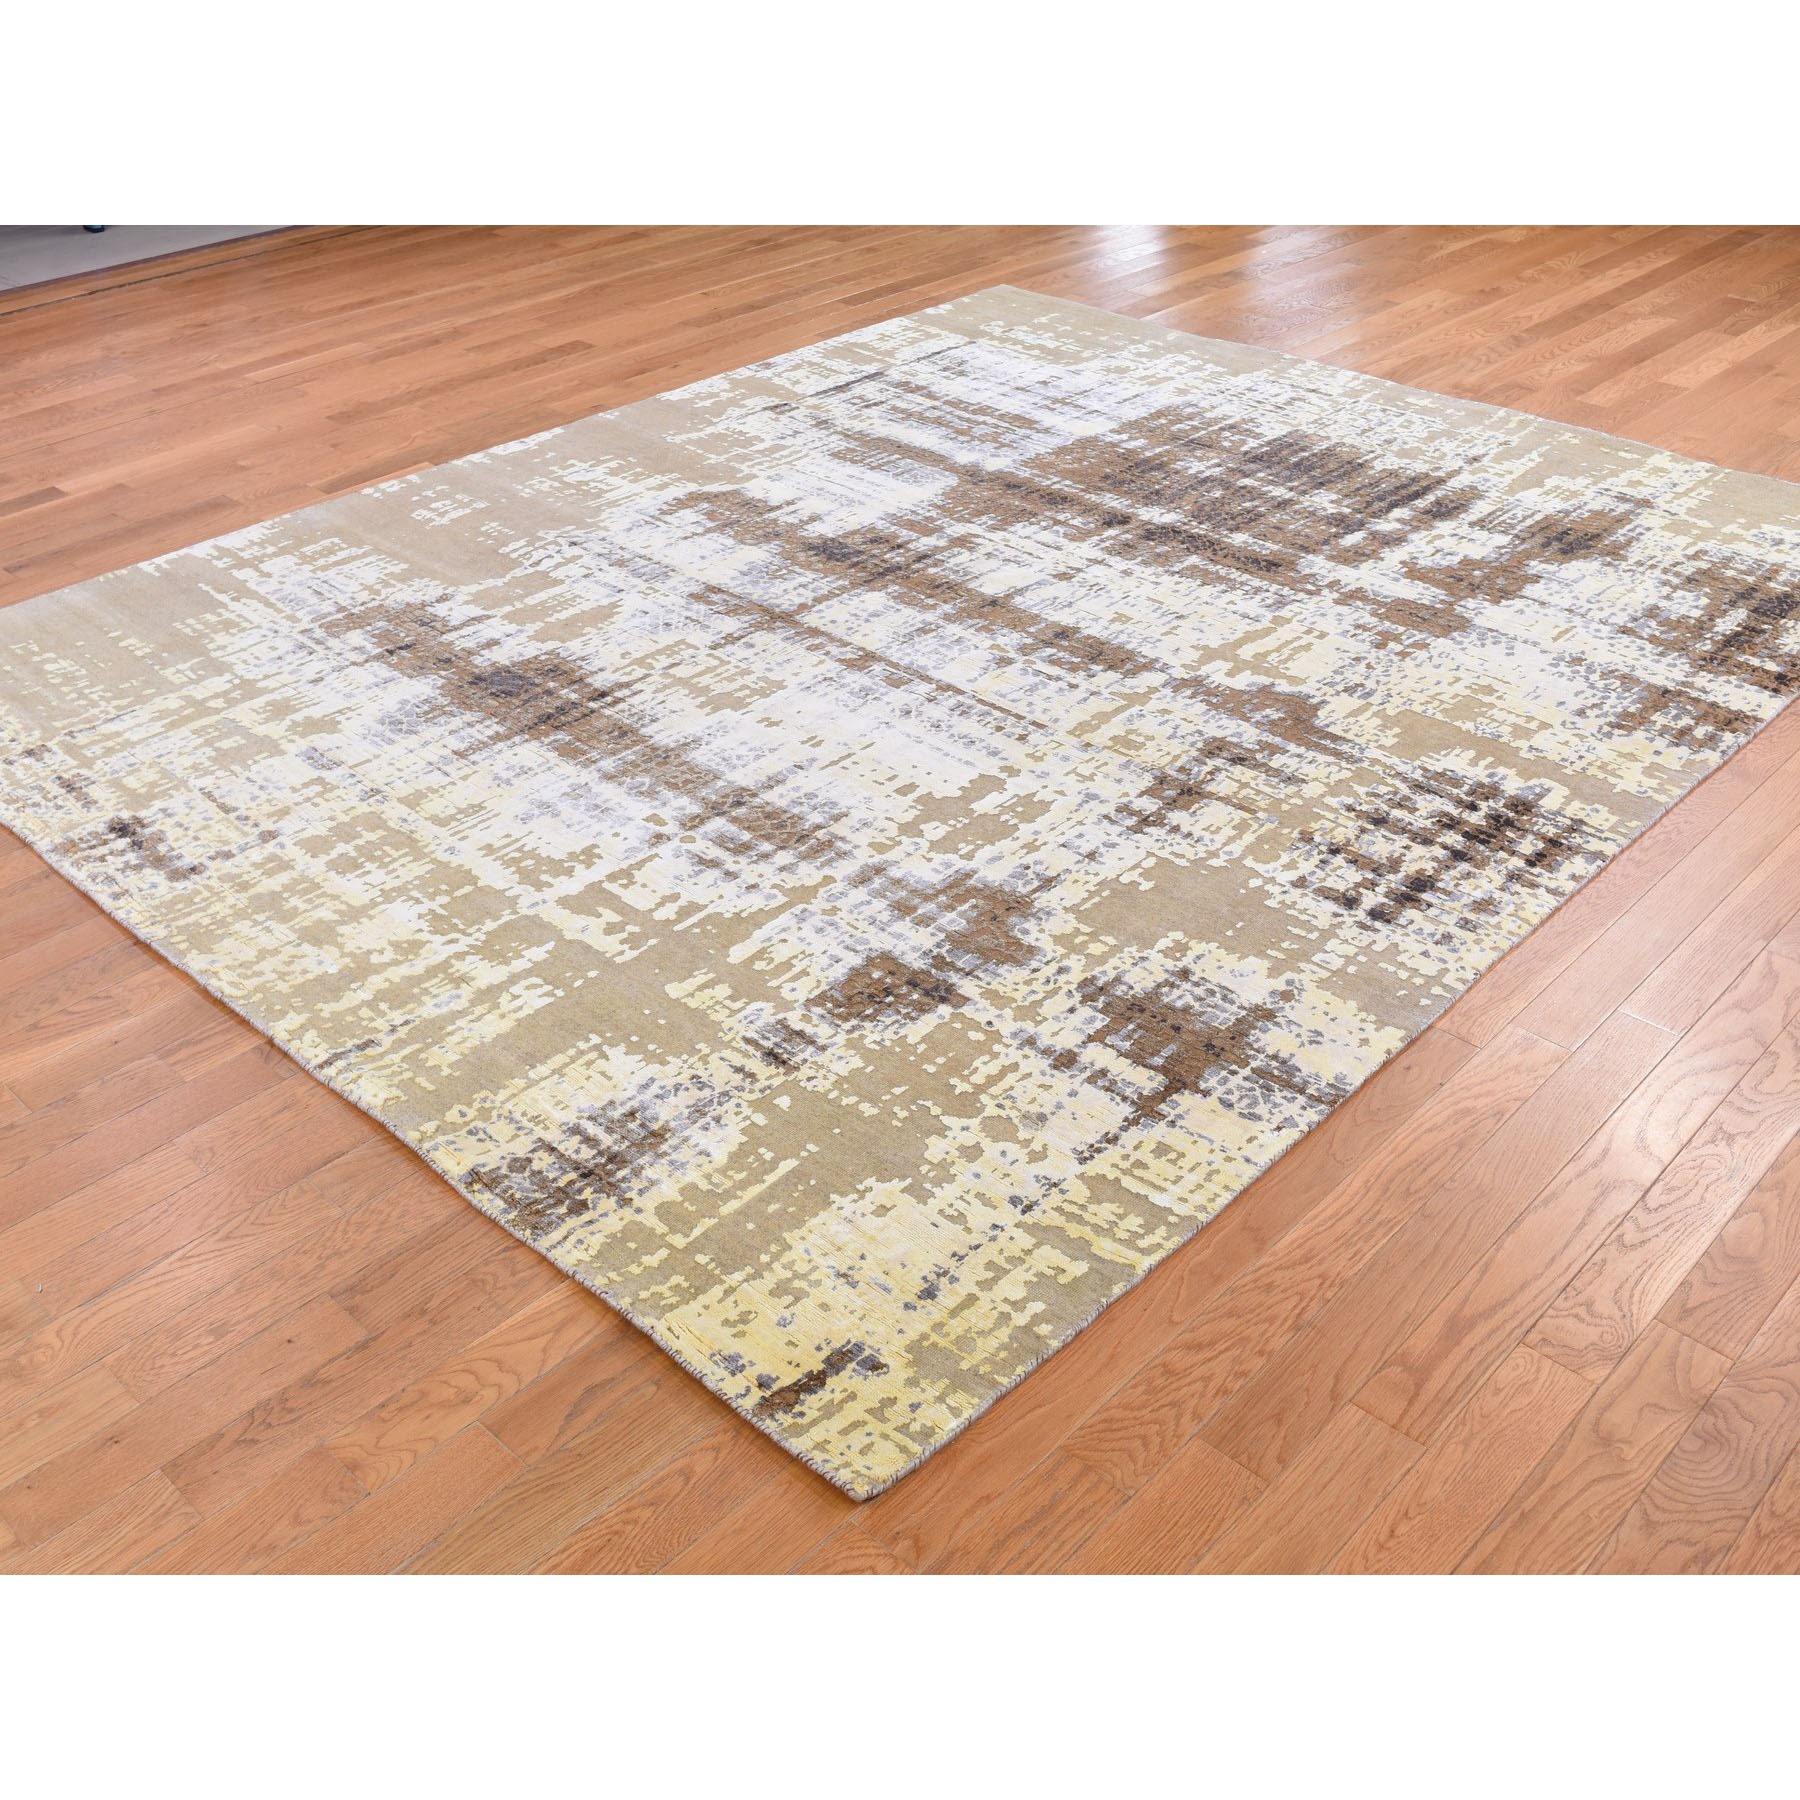 8'x9'10" Yellow Abstract Design Silk With Textured Wool Hand Woven Oriental Rug 